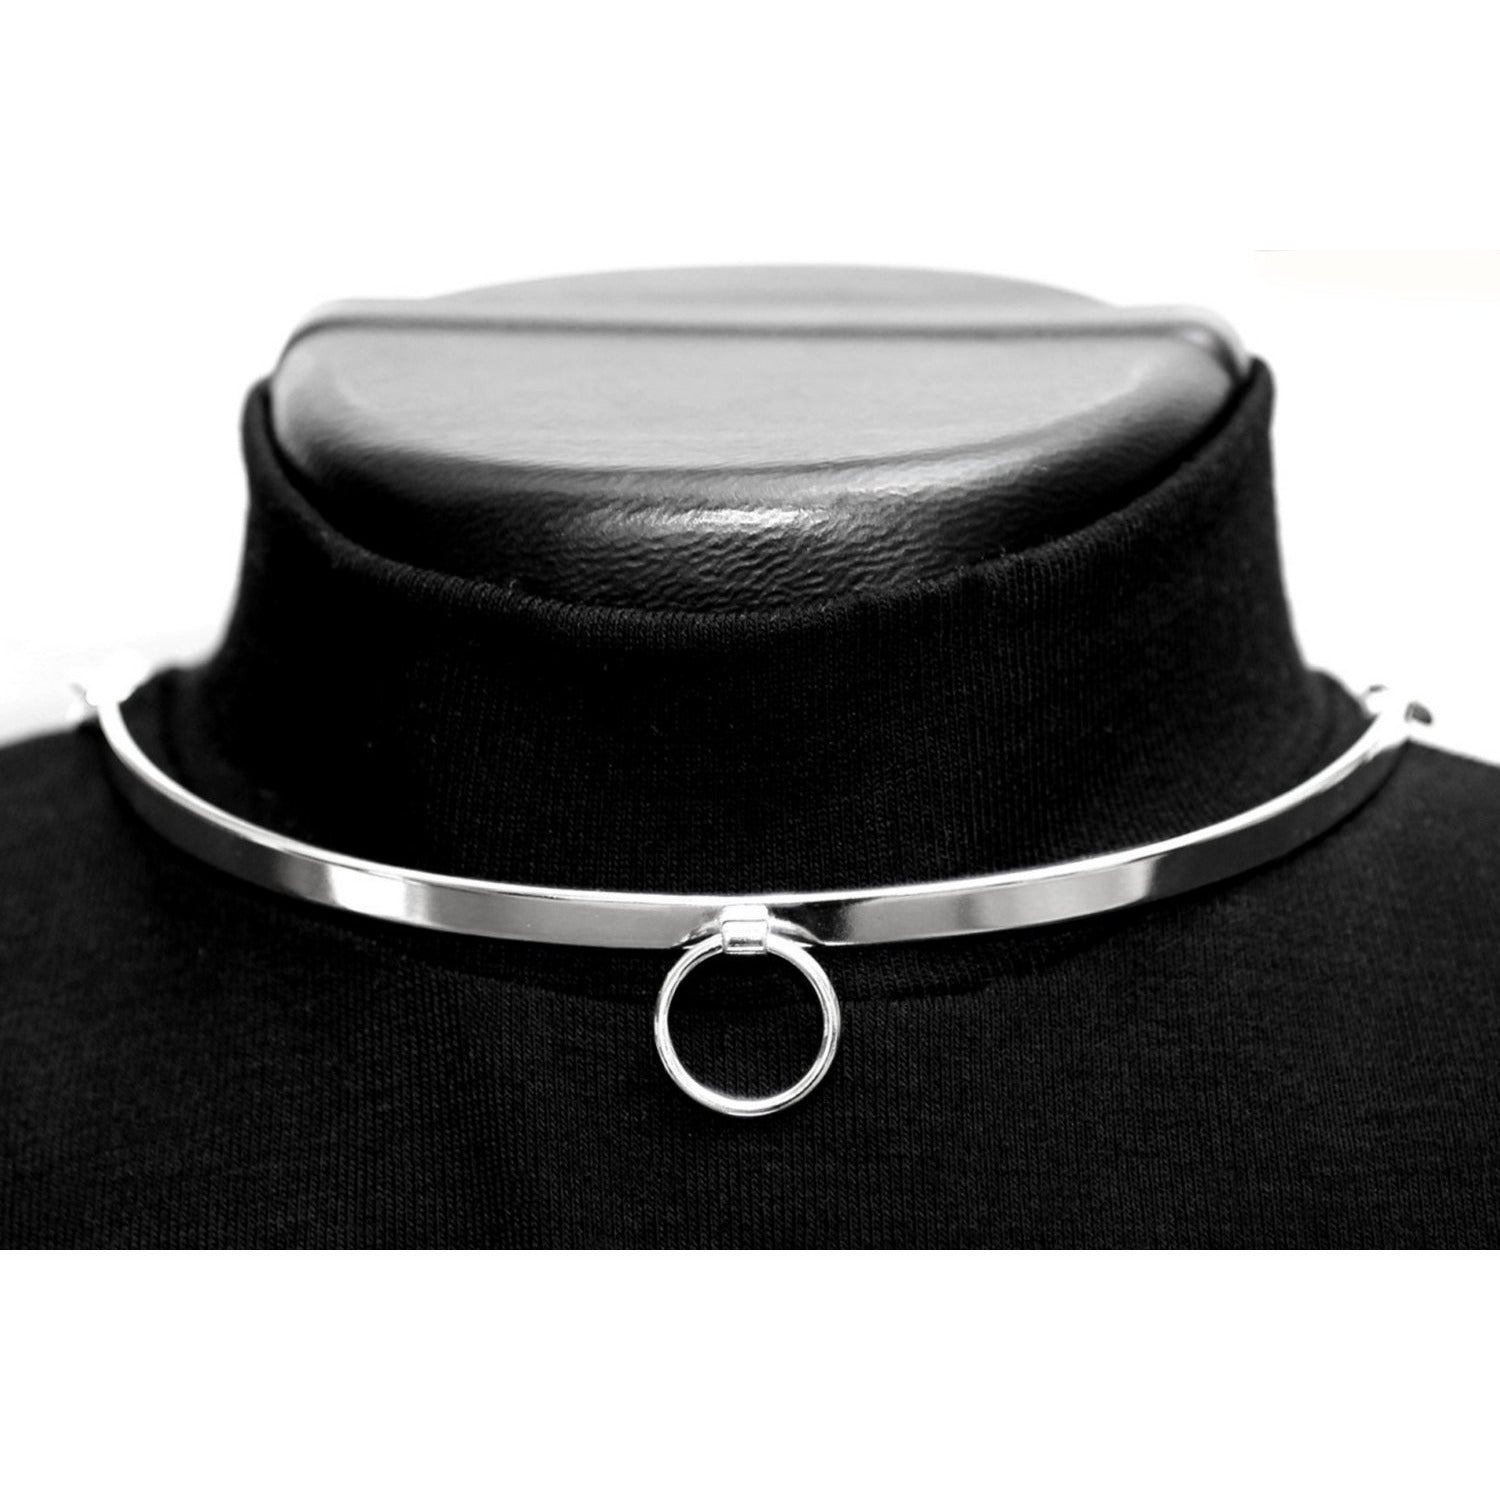 Sterling Silver-Elegant & Sexy Submissive Collar-BDSM O Ring & Padlock Clasp